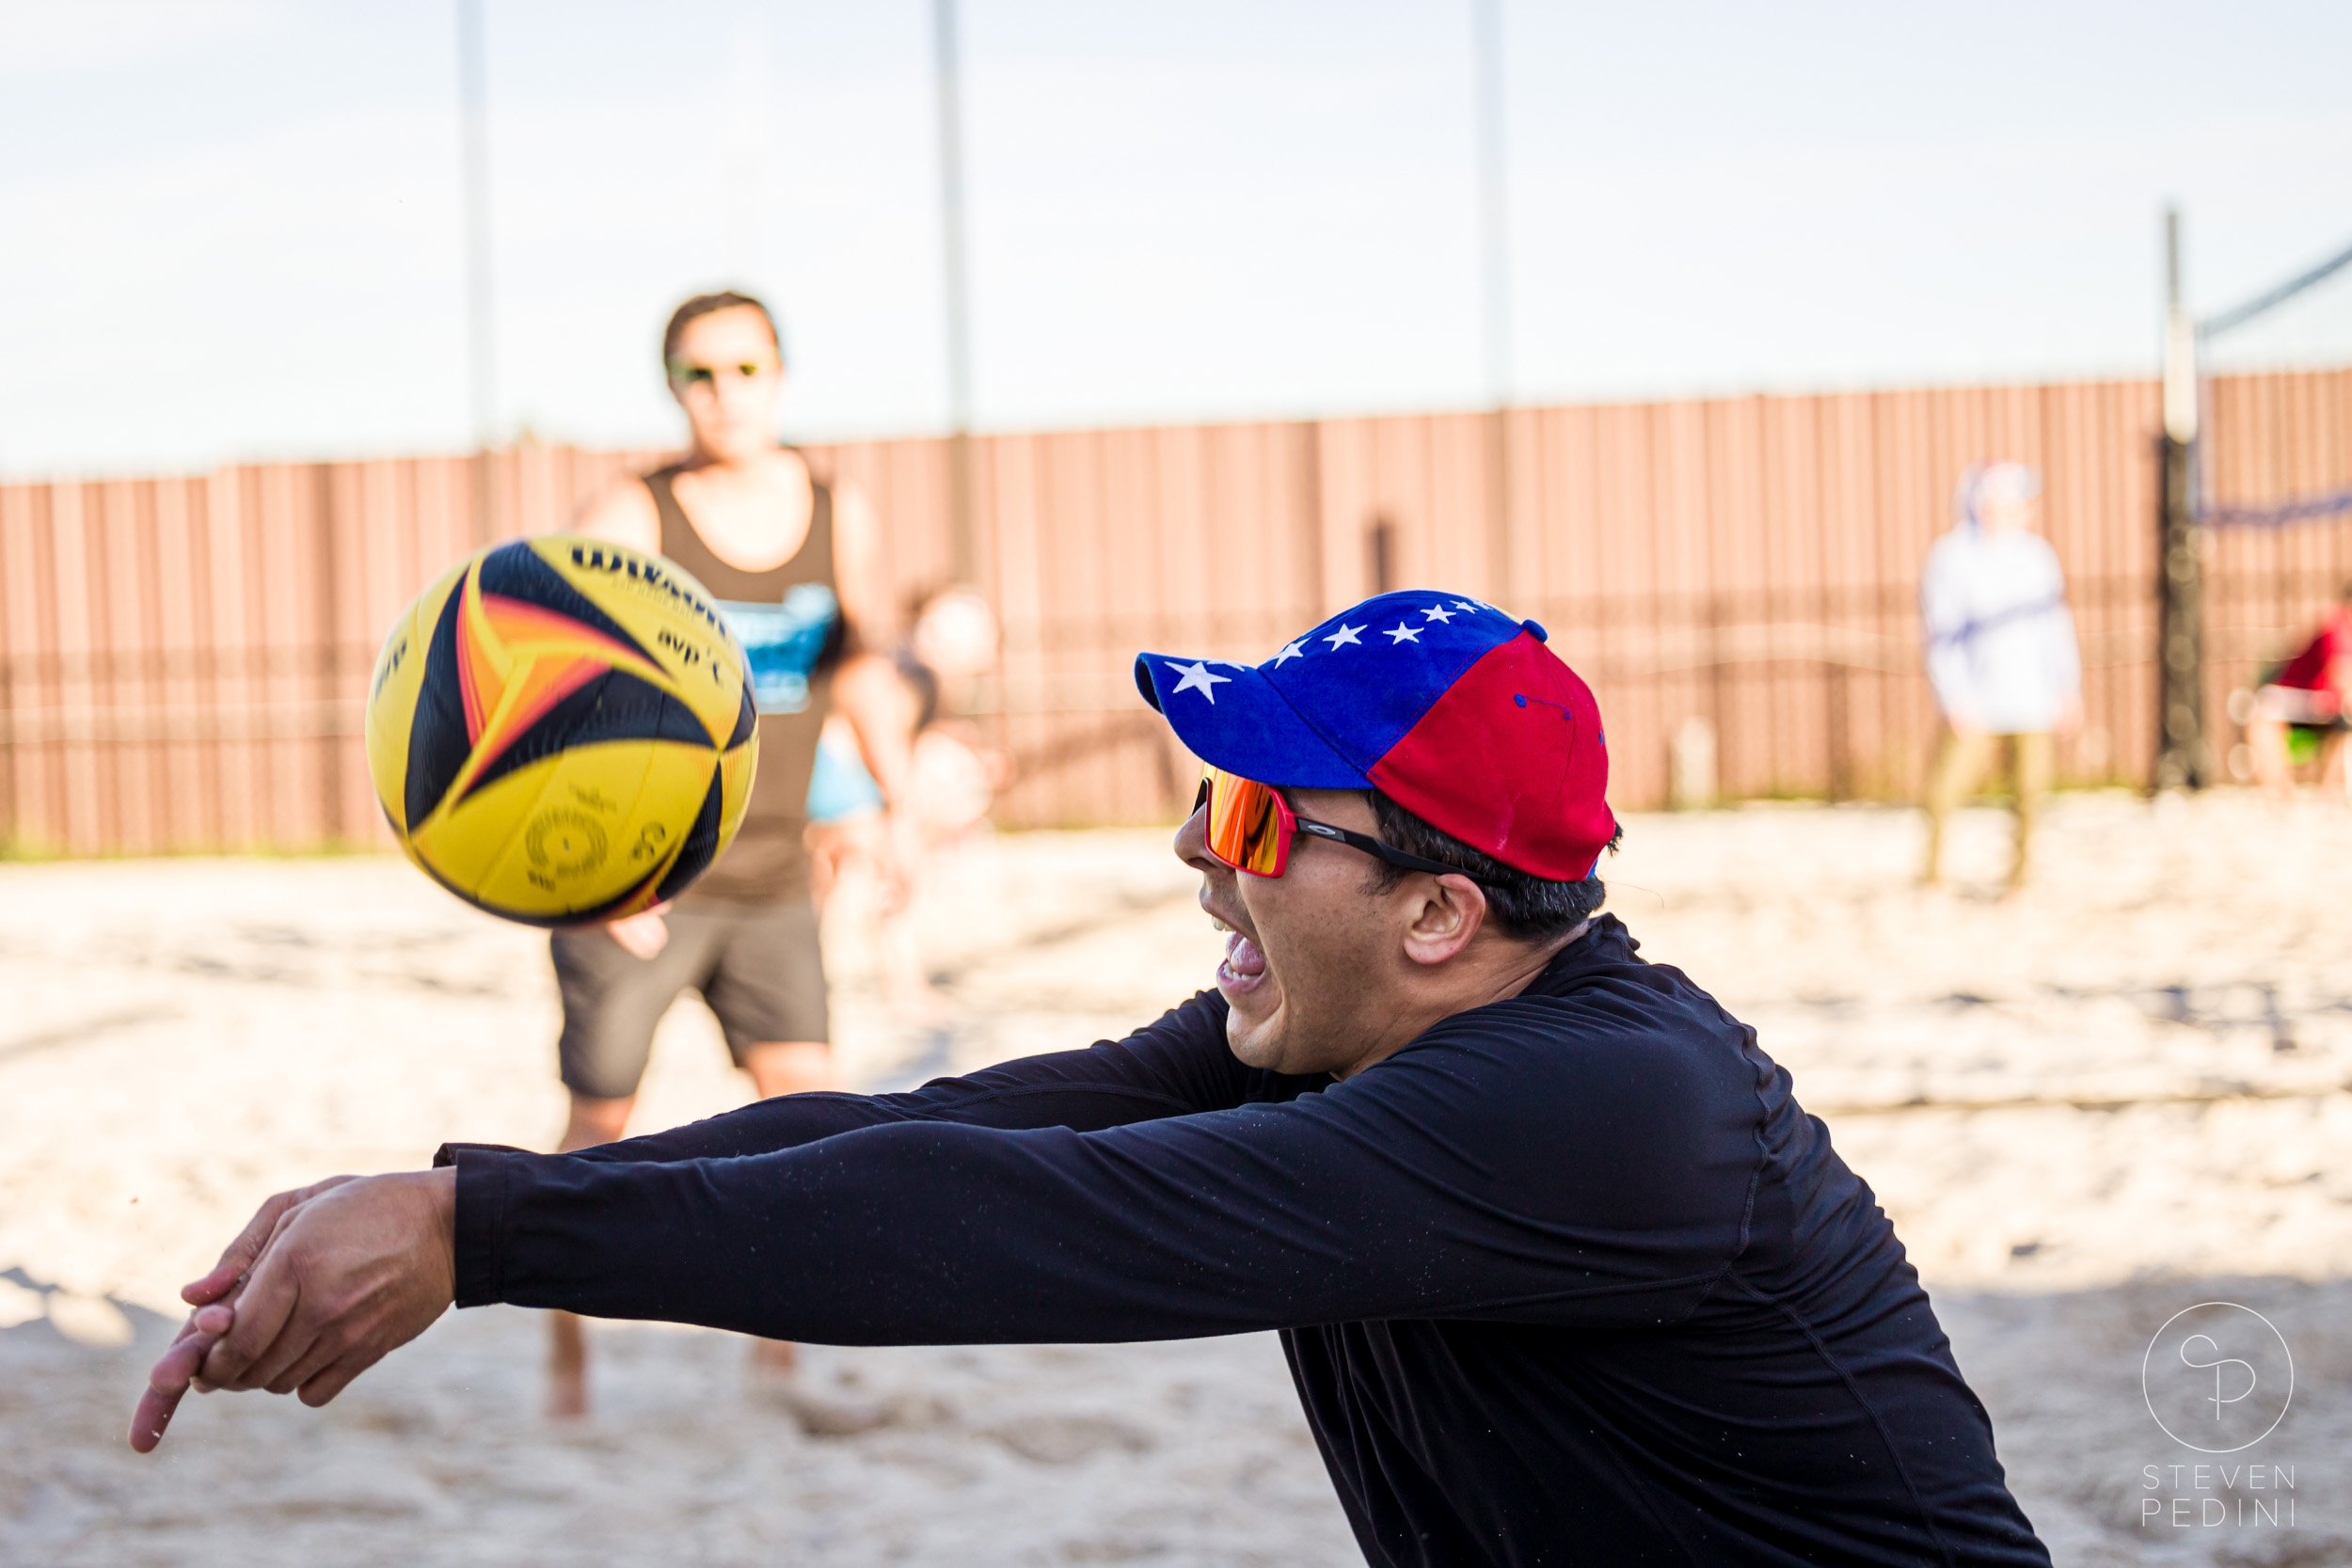 Steven Pedini Photography - Bumpy Pickle - Sand Volleyball - Houston TX - World Cup of Volleyball - 00113.jpg